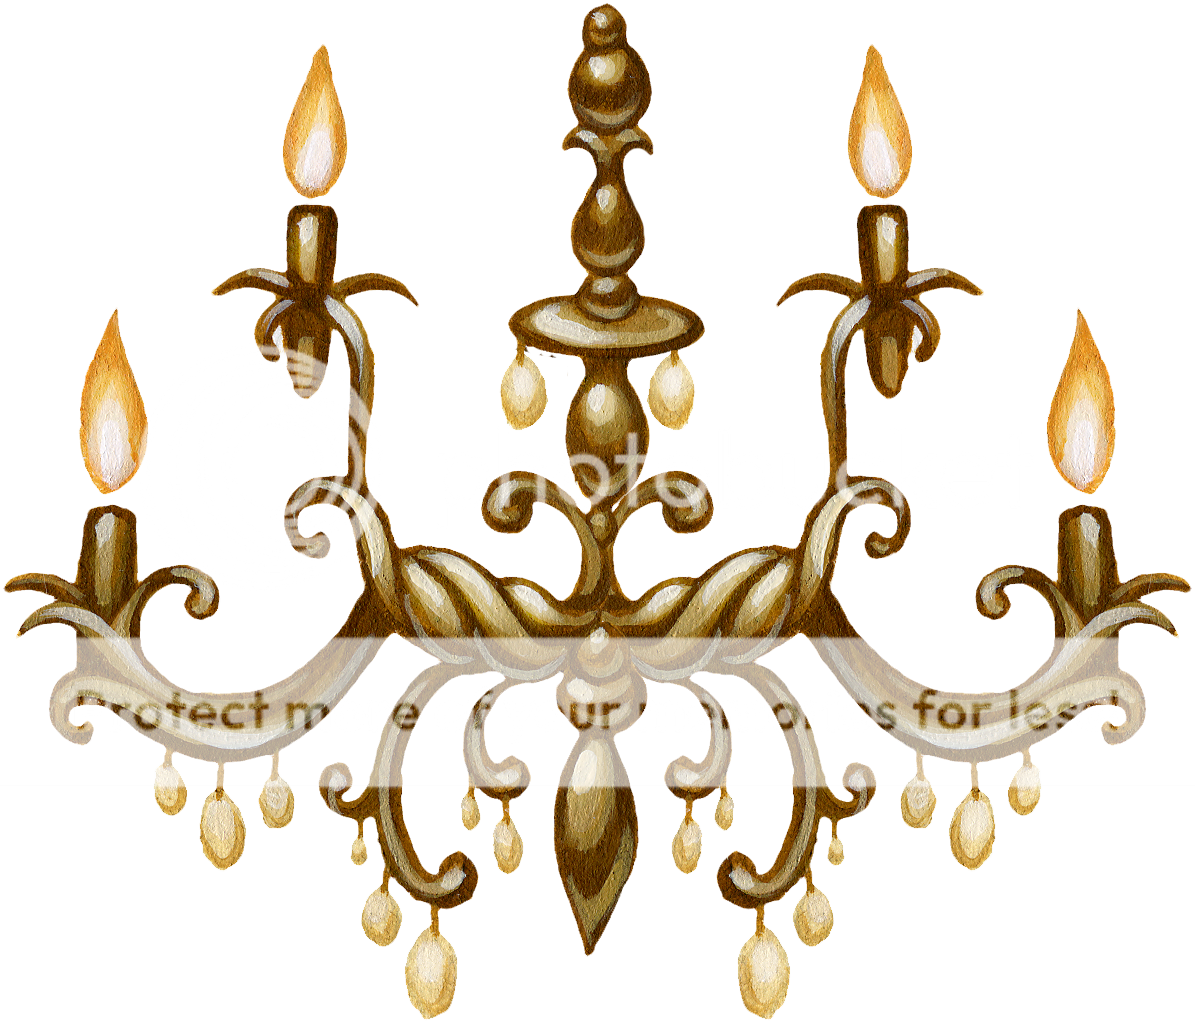  photo alana_carousel_chandelier.png